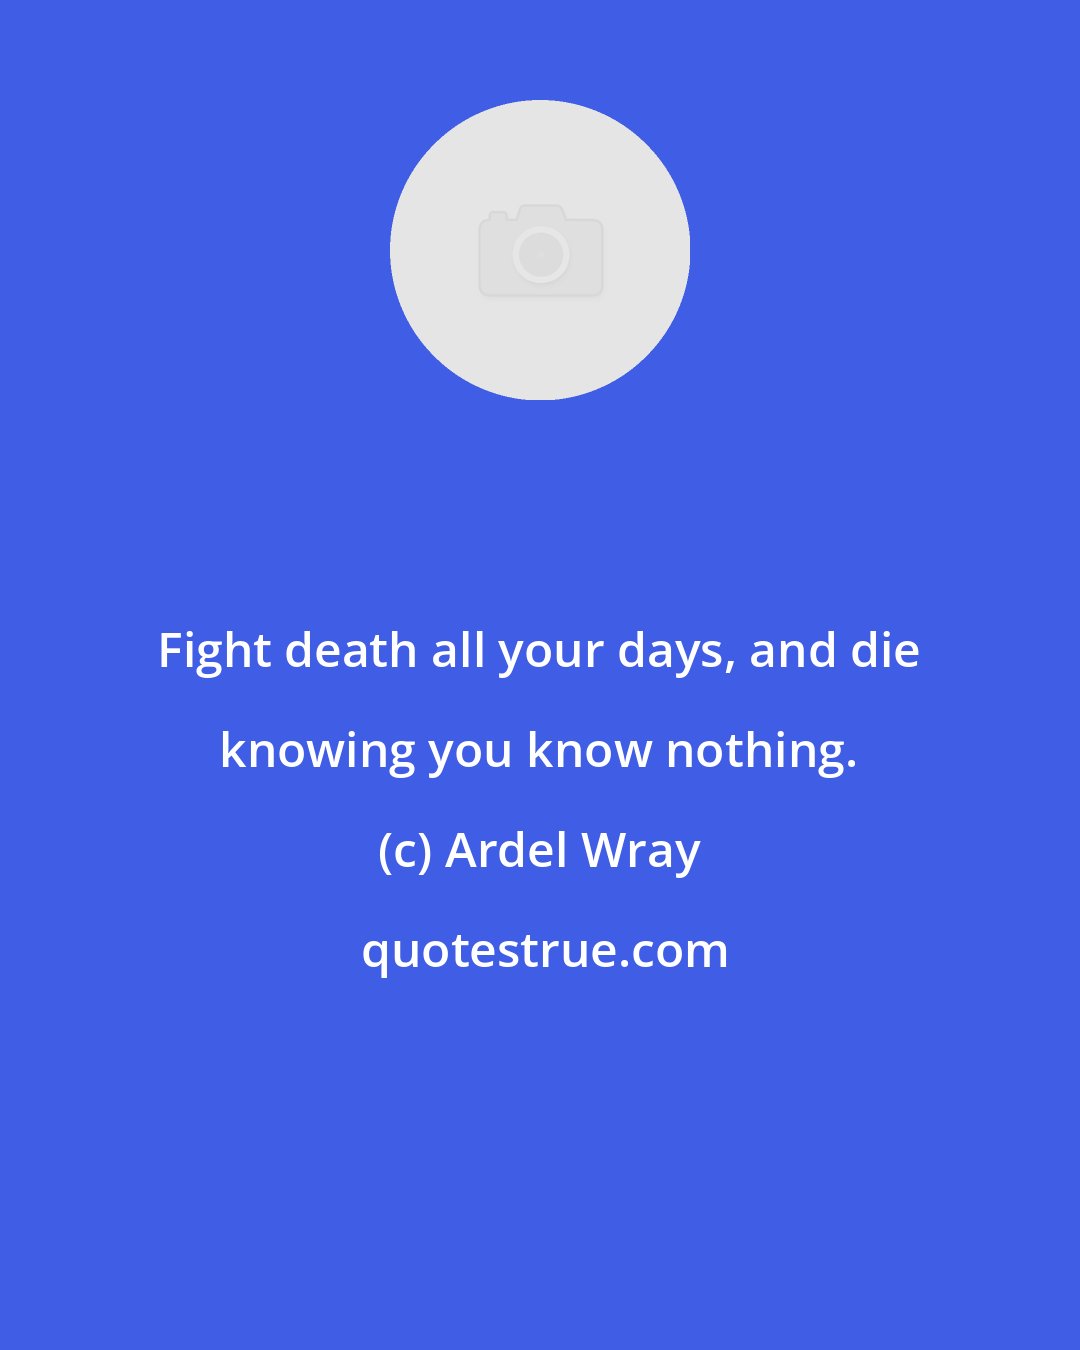 Ardel Wray: Fight death all your days, and die knowing you know nothing.